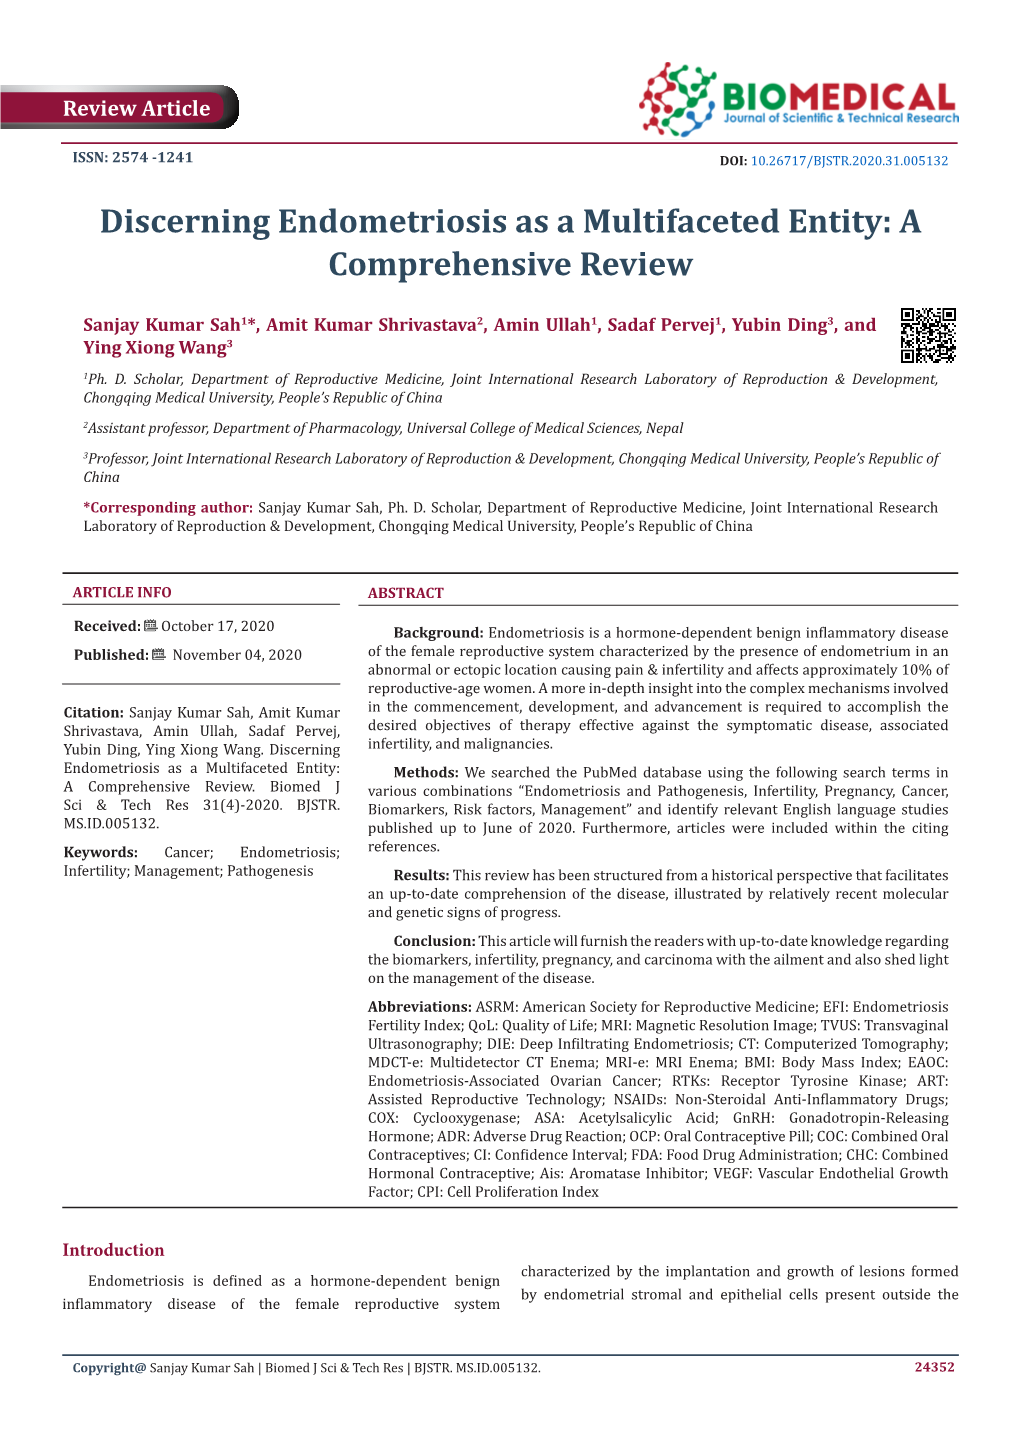 Discerning Endometriosis As a Multifaceted Entity: a Comprehensive Review